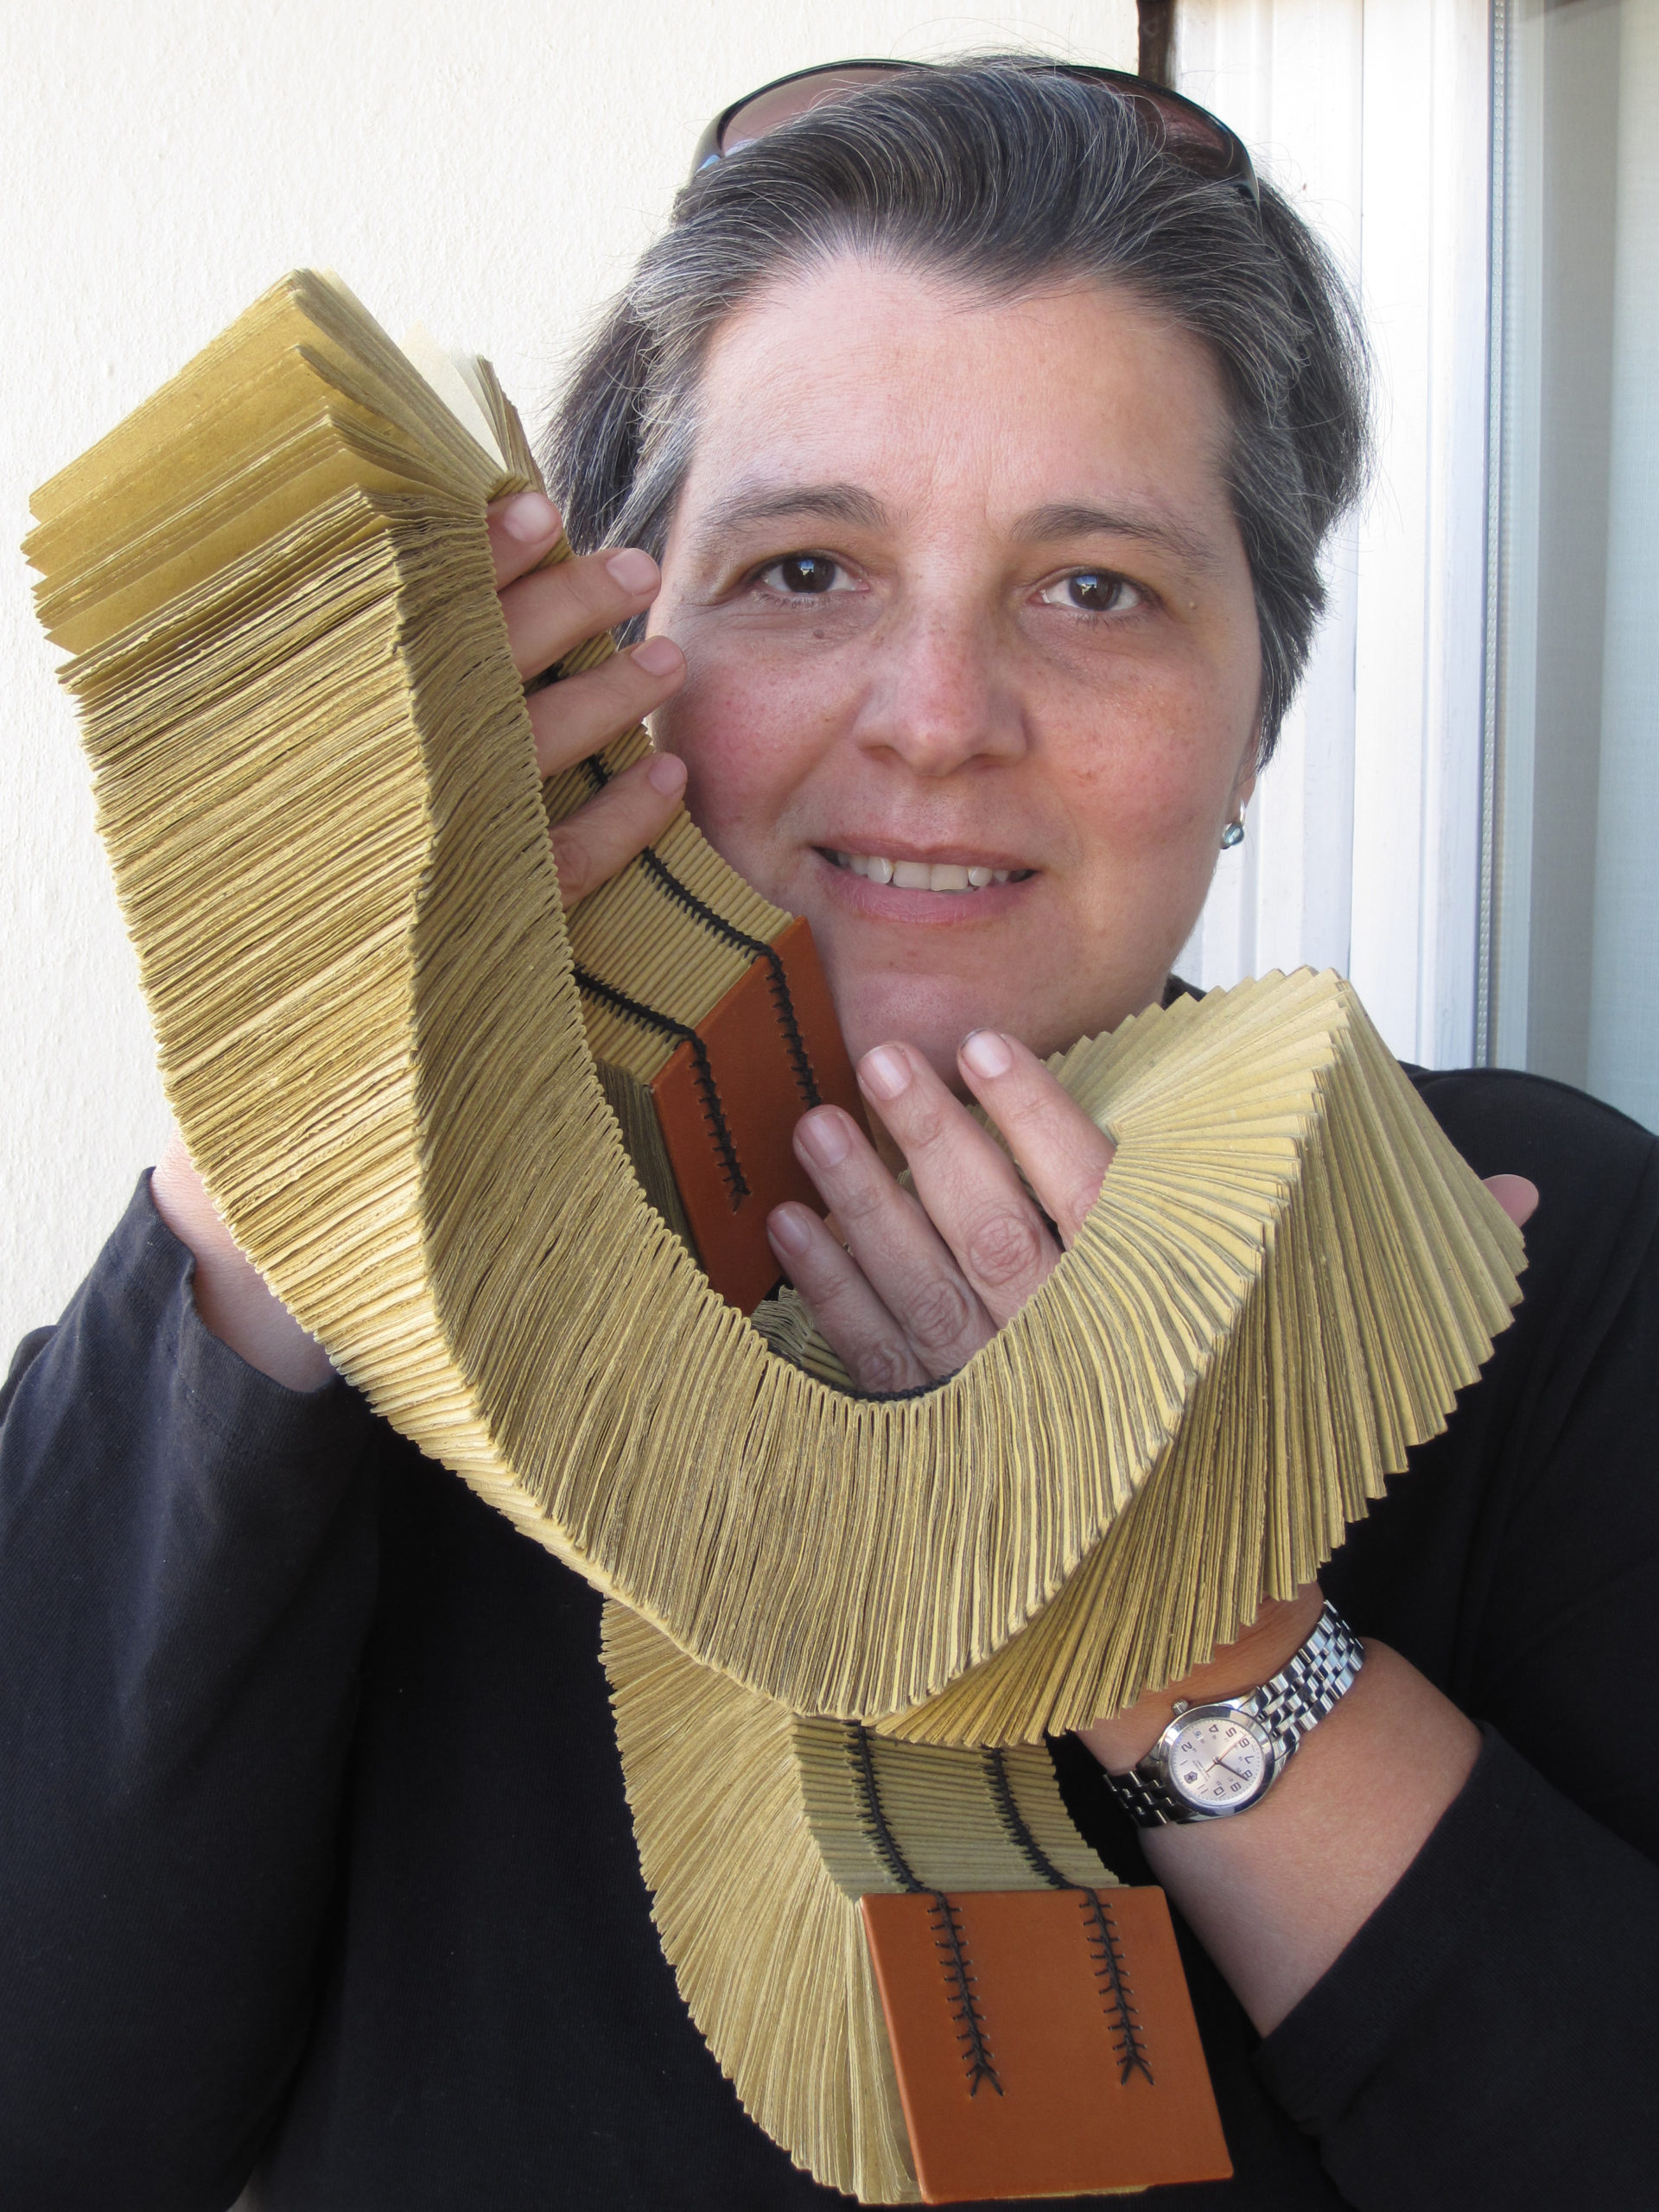 image of a woman with short hair holding an elaborately bound book, warped around her hands and against her face. She is staring into the camera with a smile